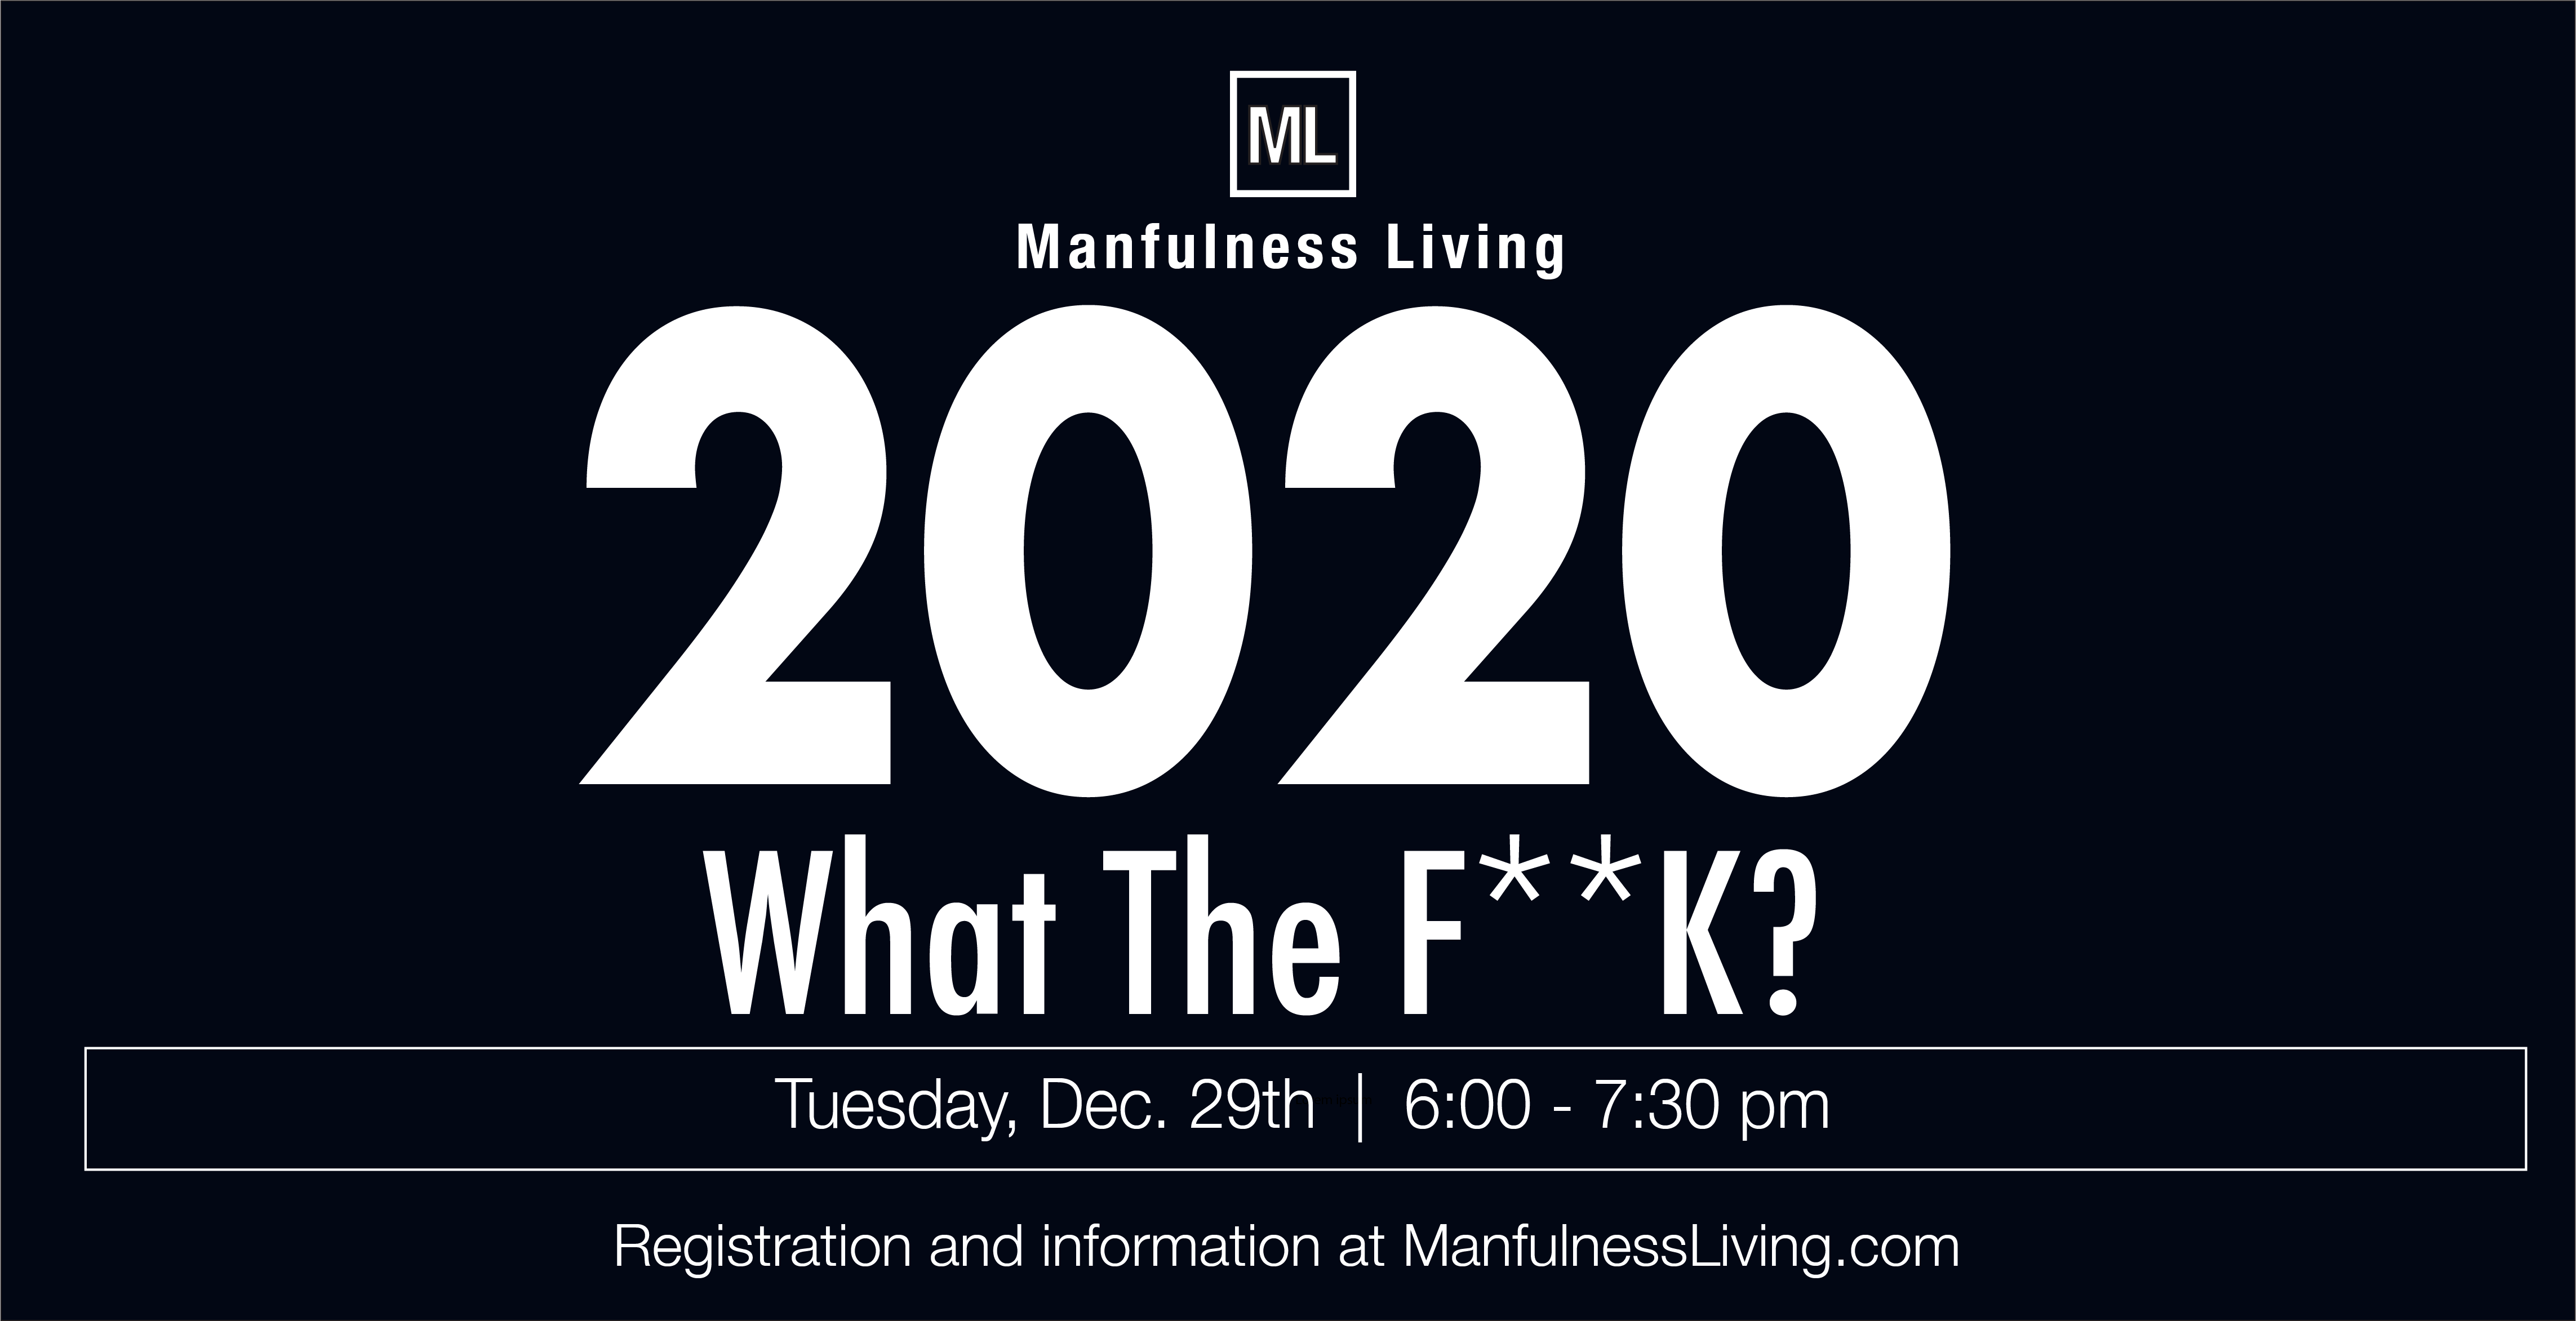 Manfulness LIving Event - 2020 - What the F**k?